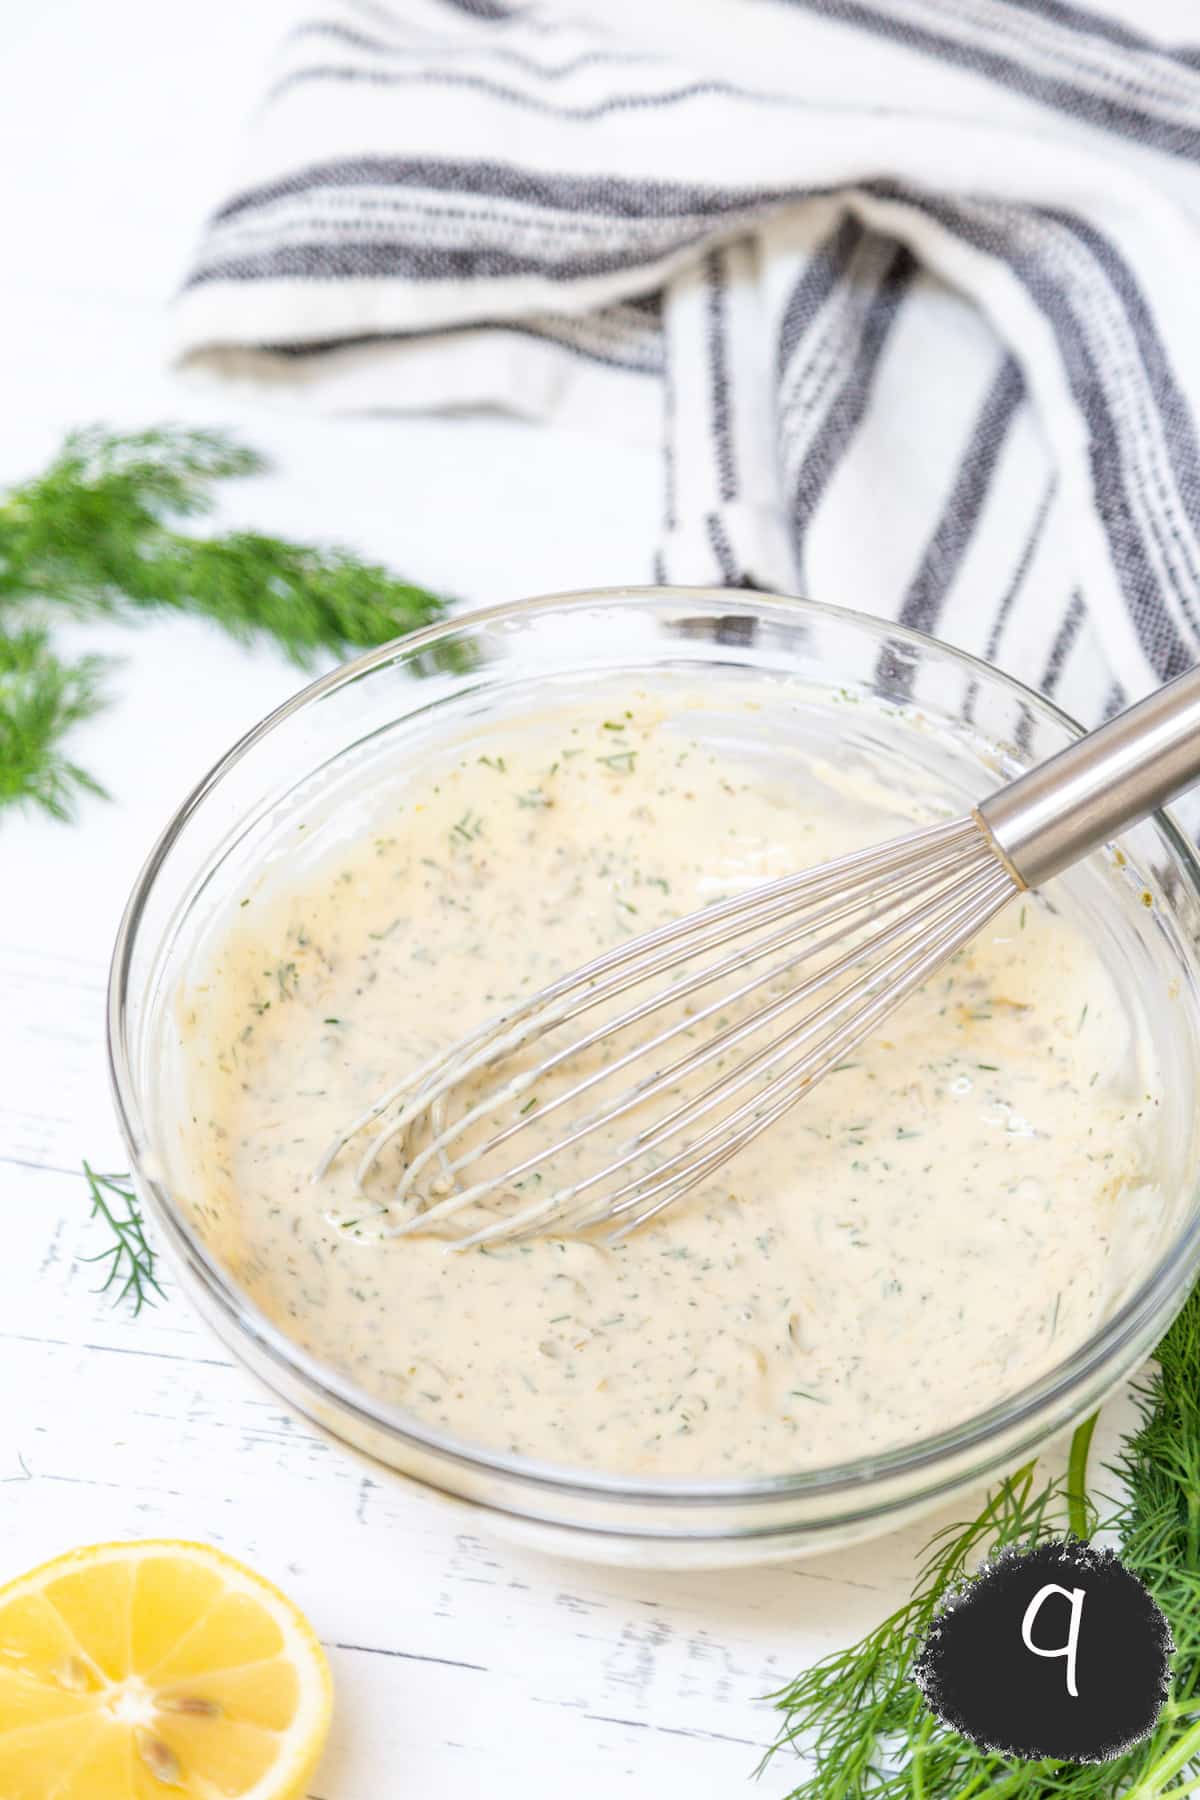 Tartar sauce in a glass bowl with a whisk.